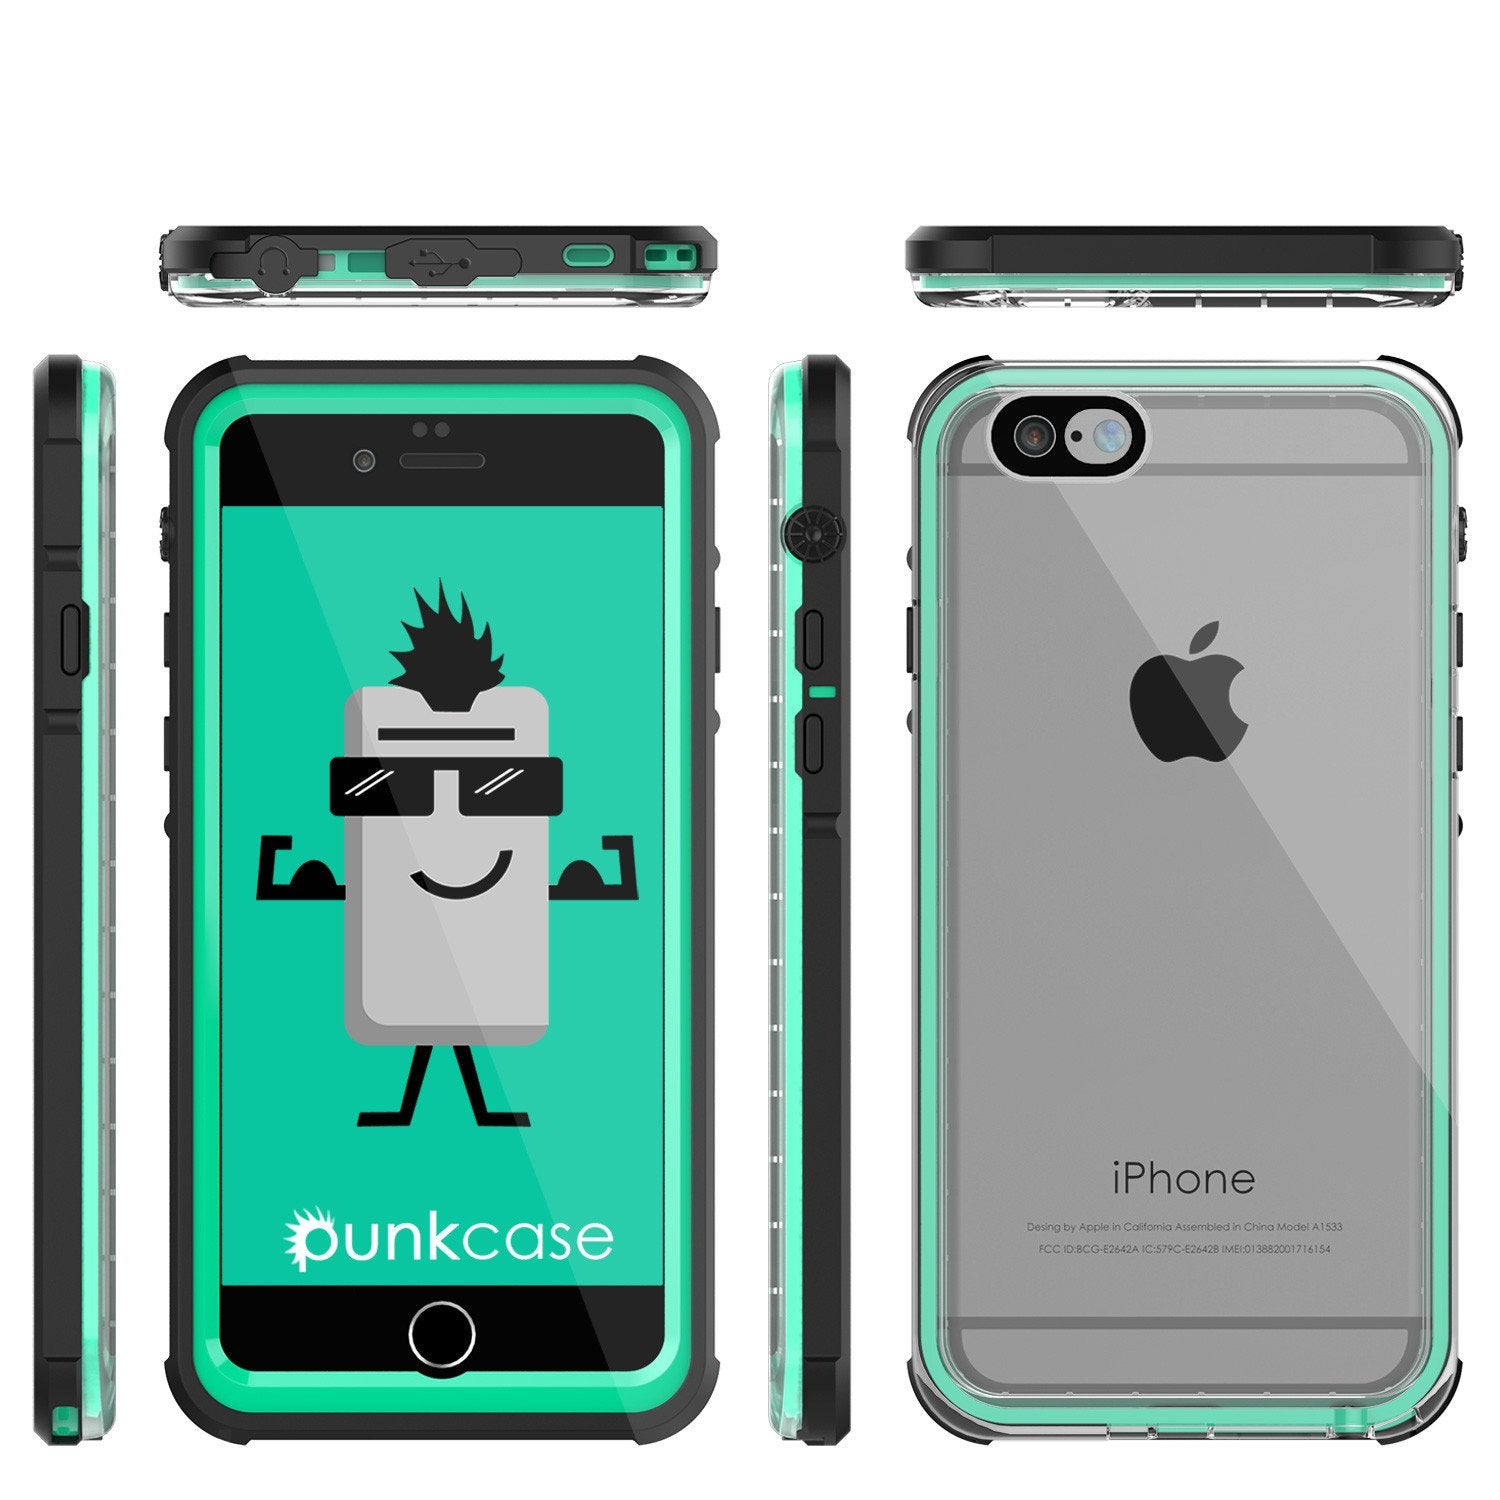 iPhone 6/6S Waterproof Case, PUNKcase CRYSTAL Teal W/ Attached Screen Protector  | Warranty - PunkCase NZ